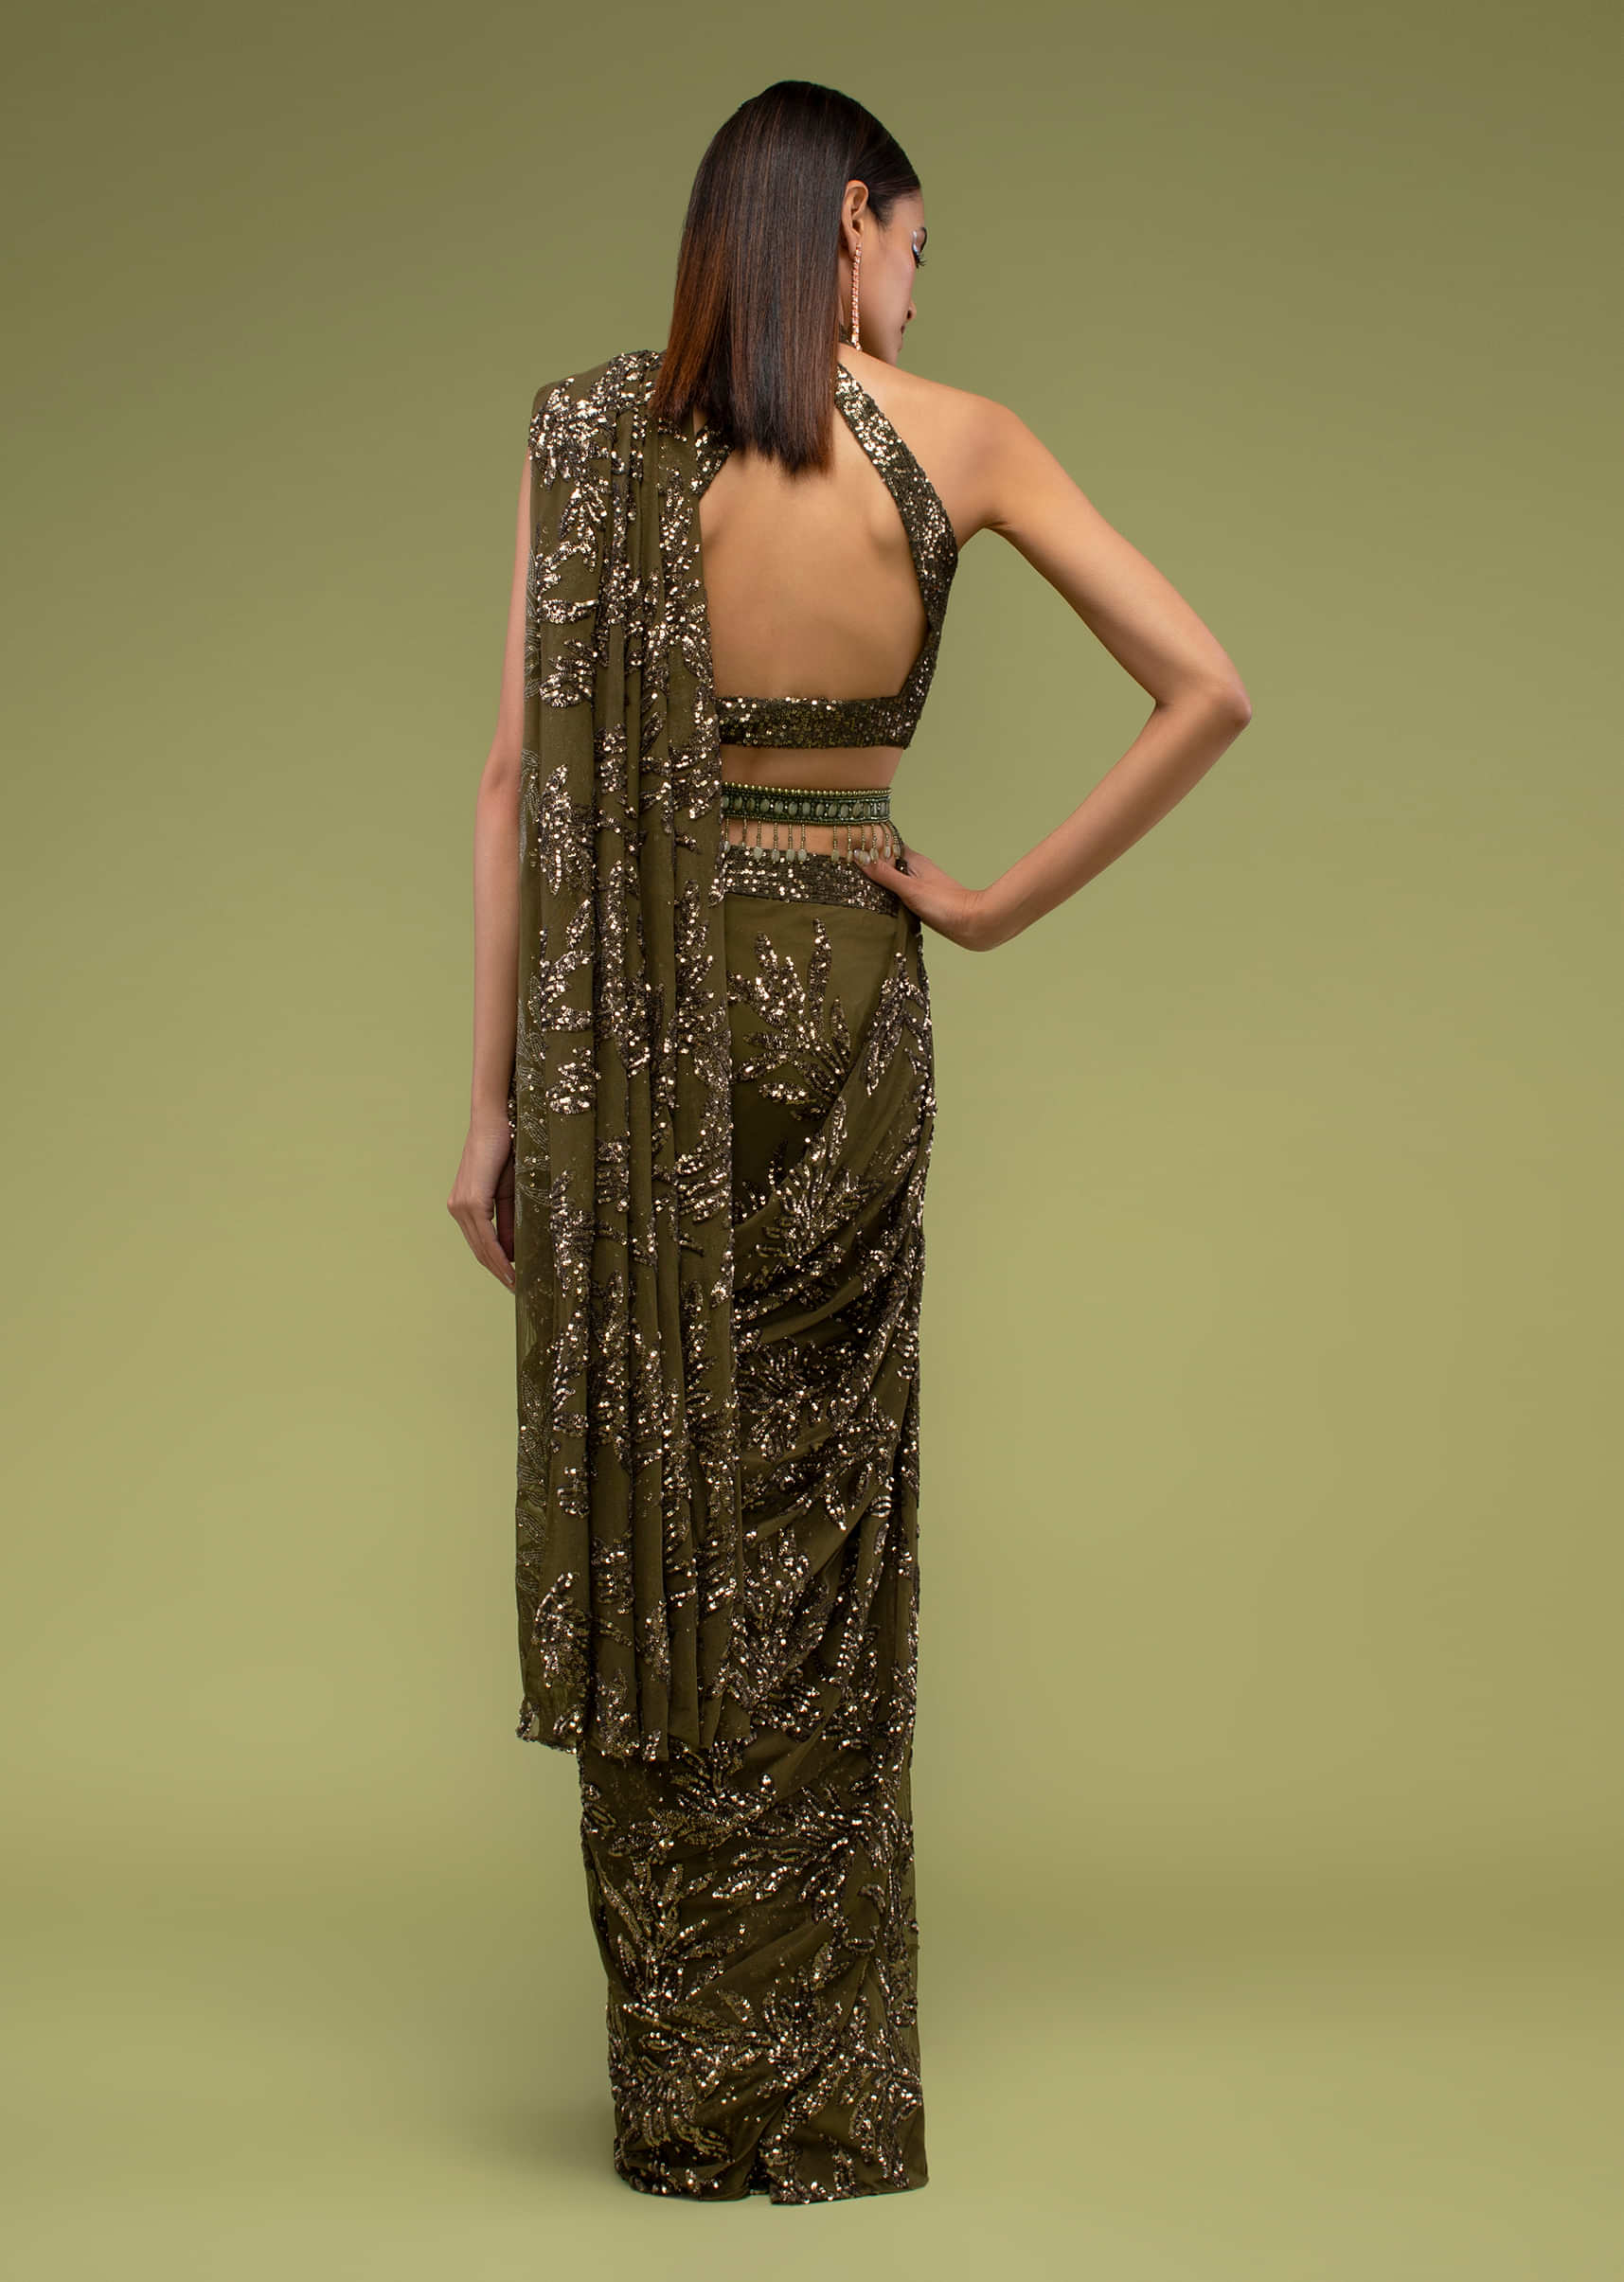 Military Olive Ready Pleated Saree In Sequins Embroidery, Crafted In Net With Side Zip Closure